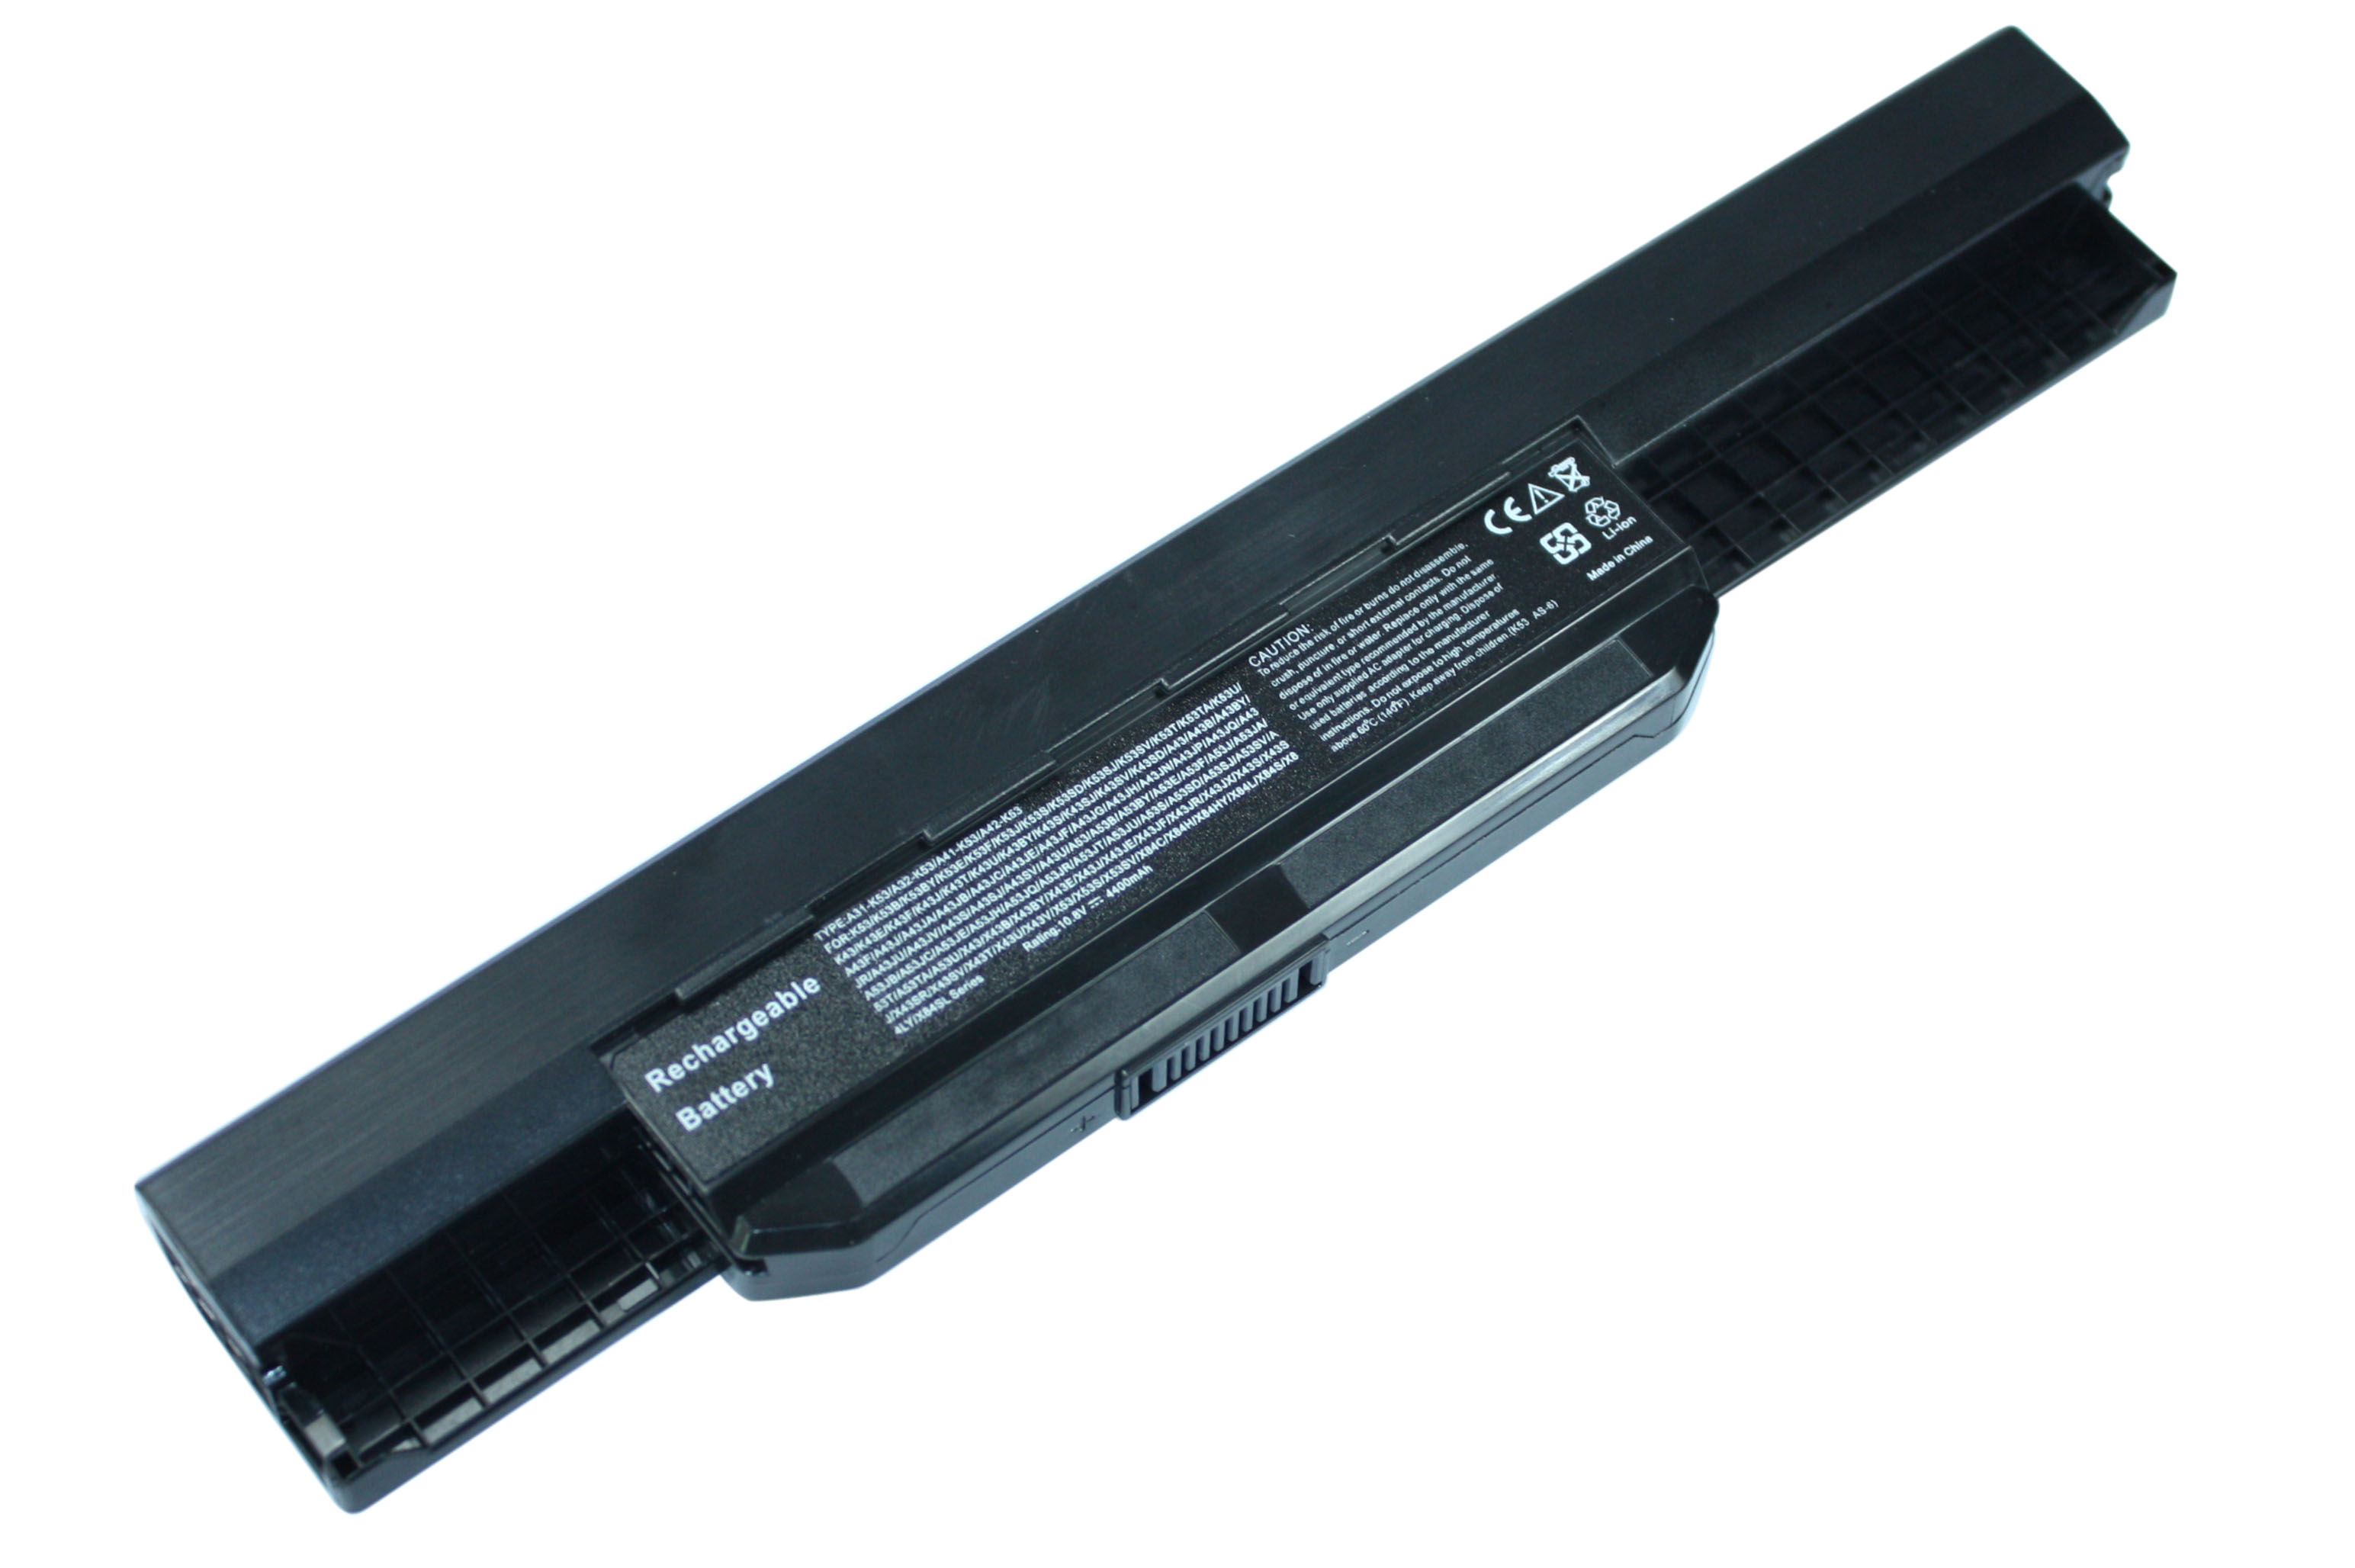 Rechargeable Laptop battery For Asus A43 A53 K43 K53 X43 X44 X53